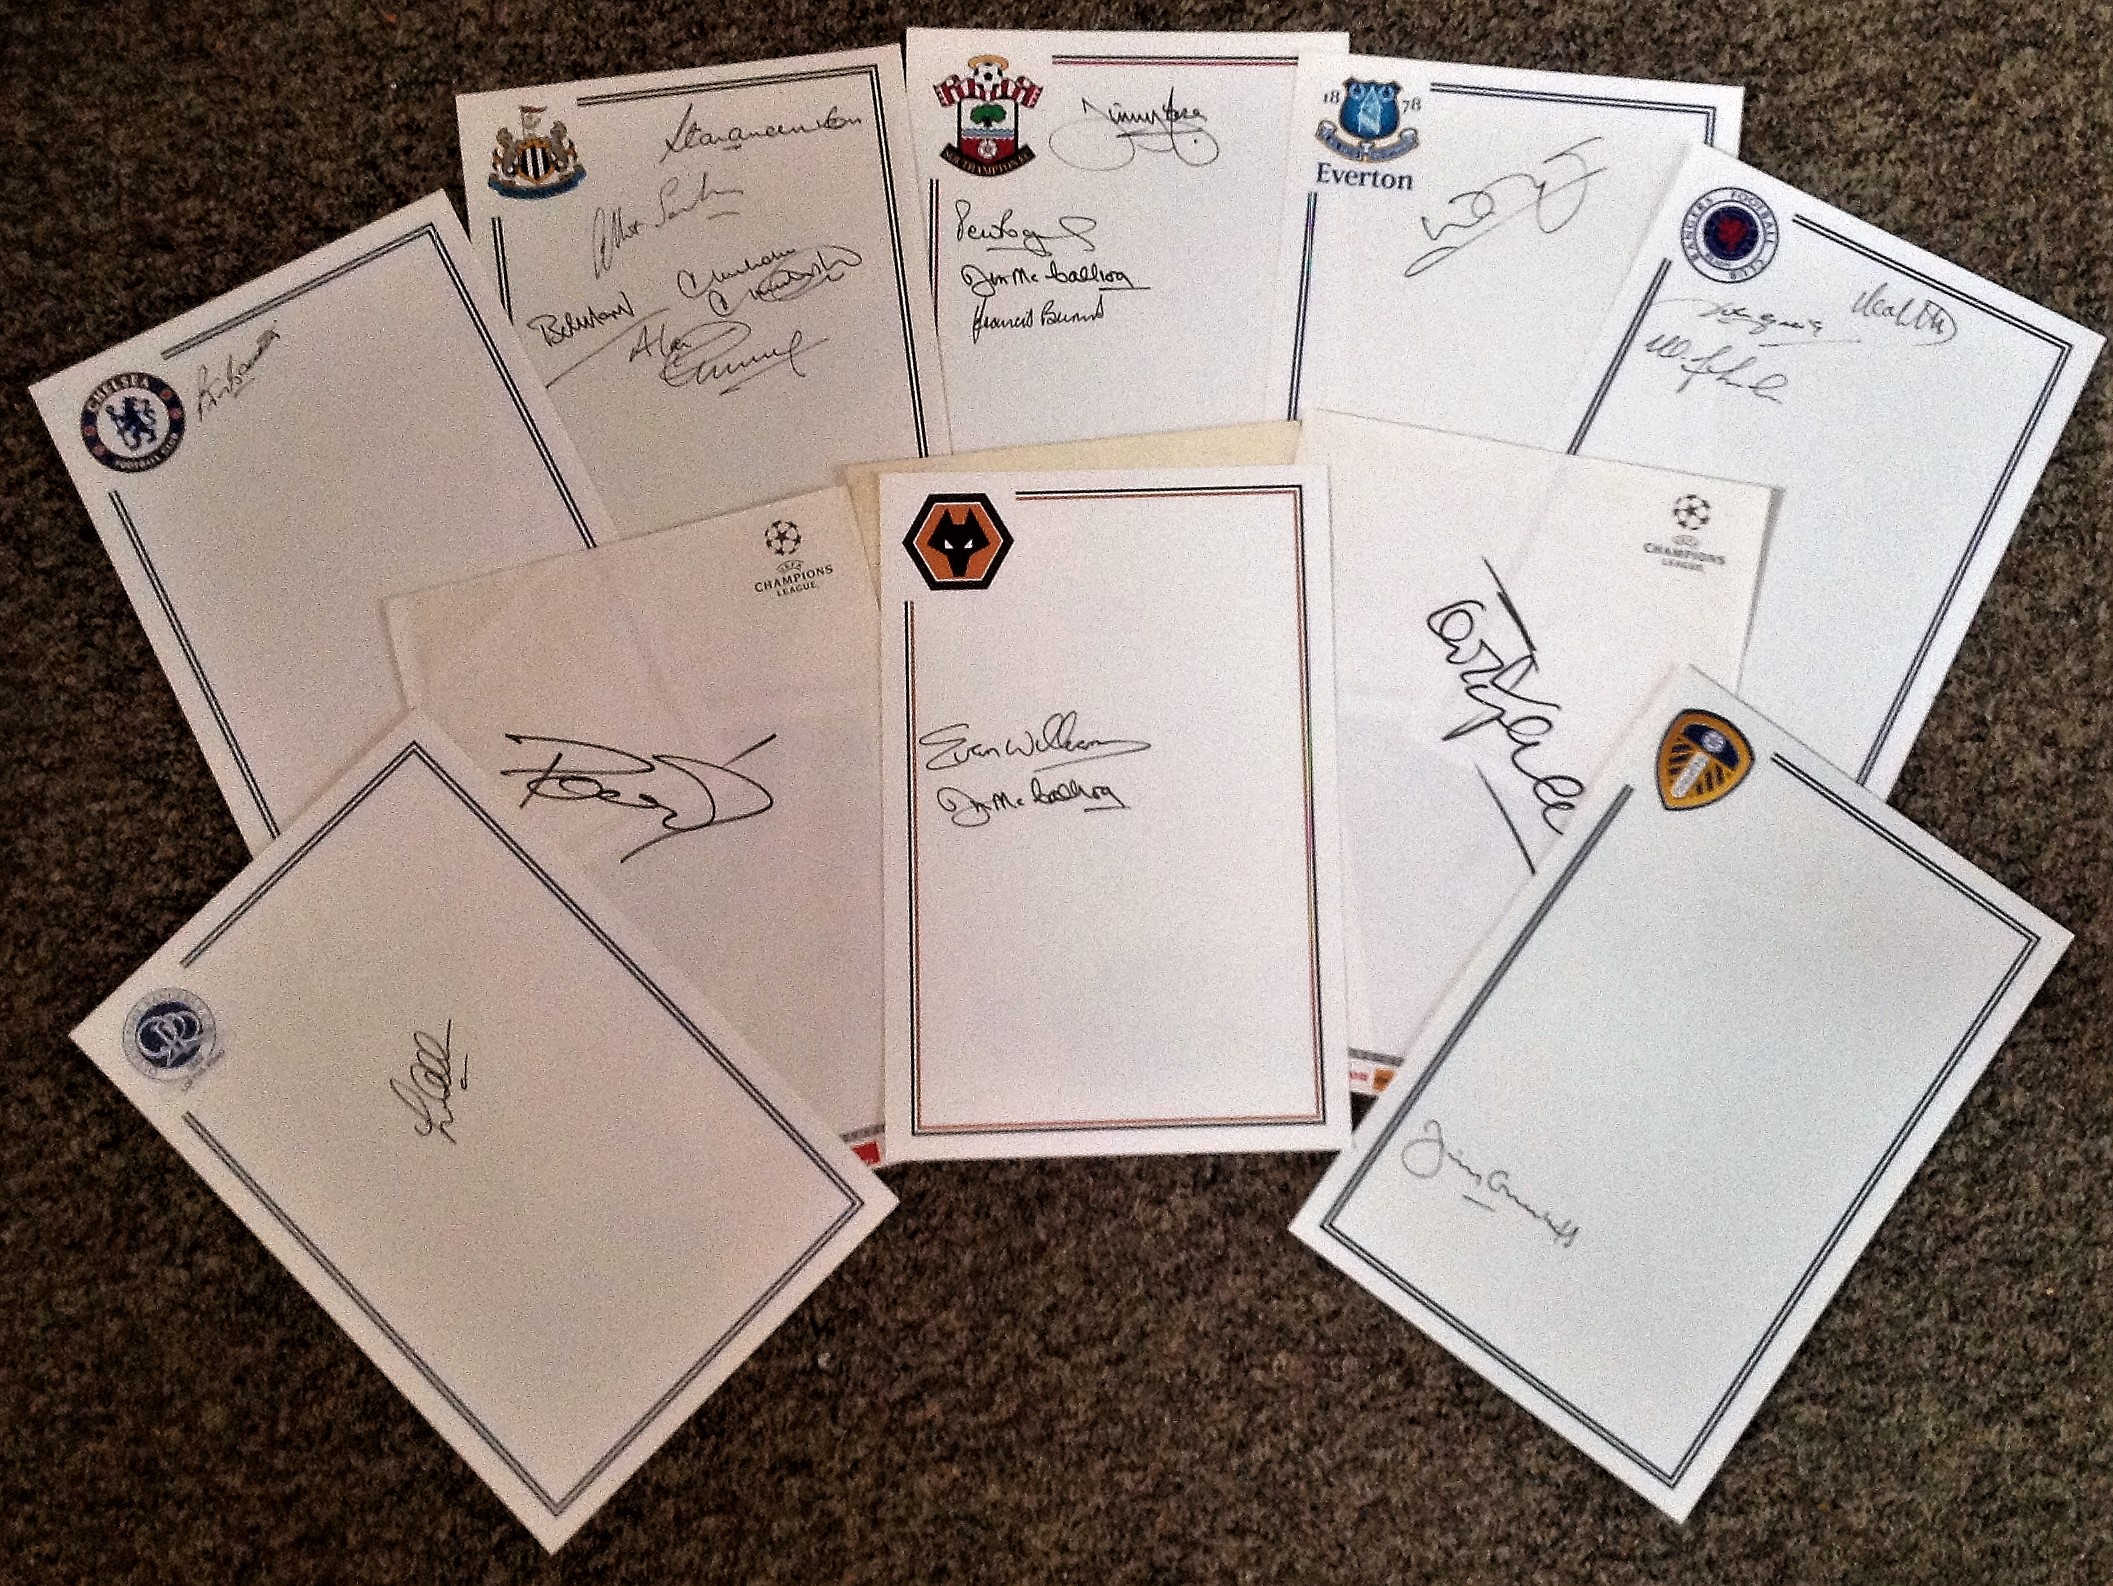 Football Legends collection 11 signature pieces some great names includes Peter Bonetti, Terry